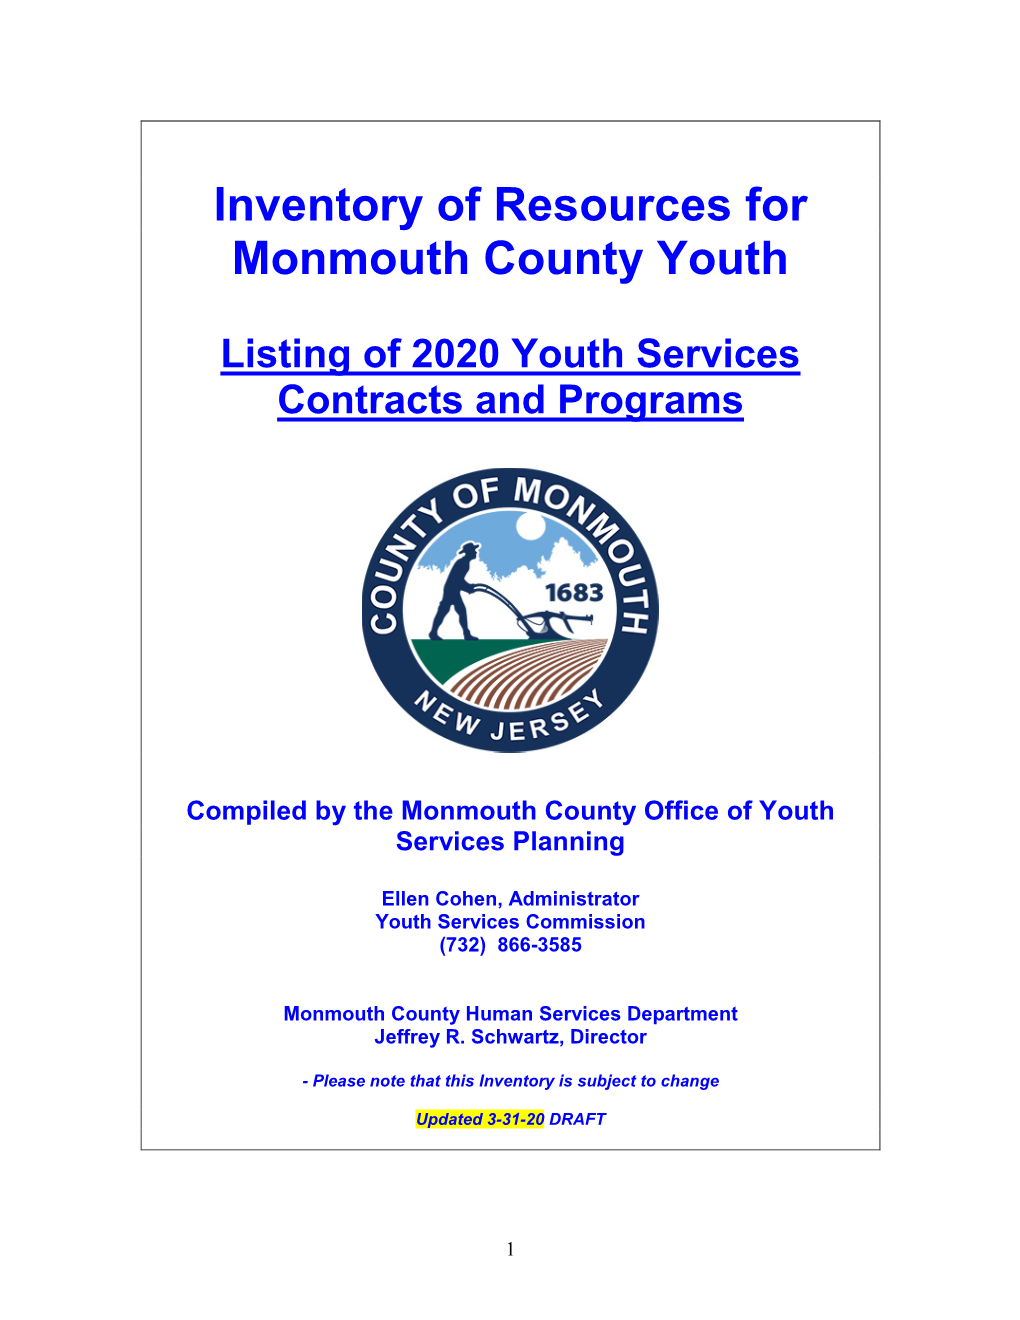 2020 Inventory of Resources for Monmouth County Youth